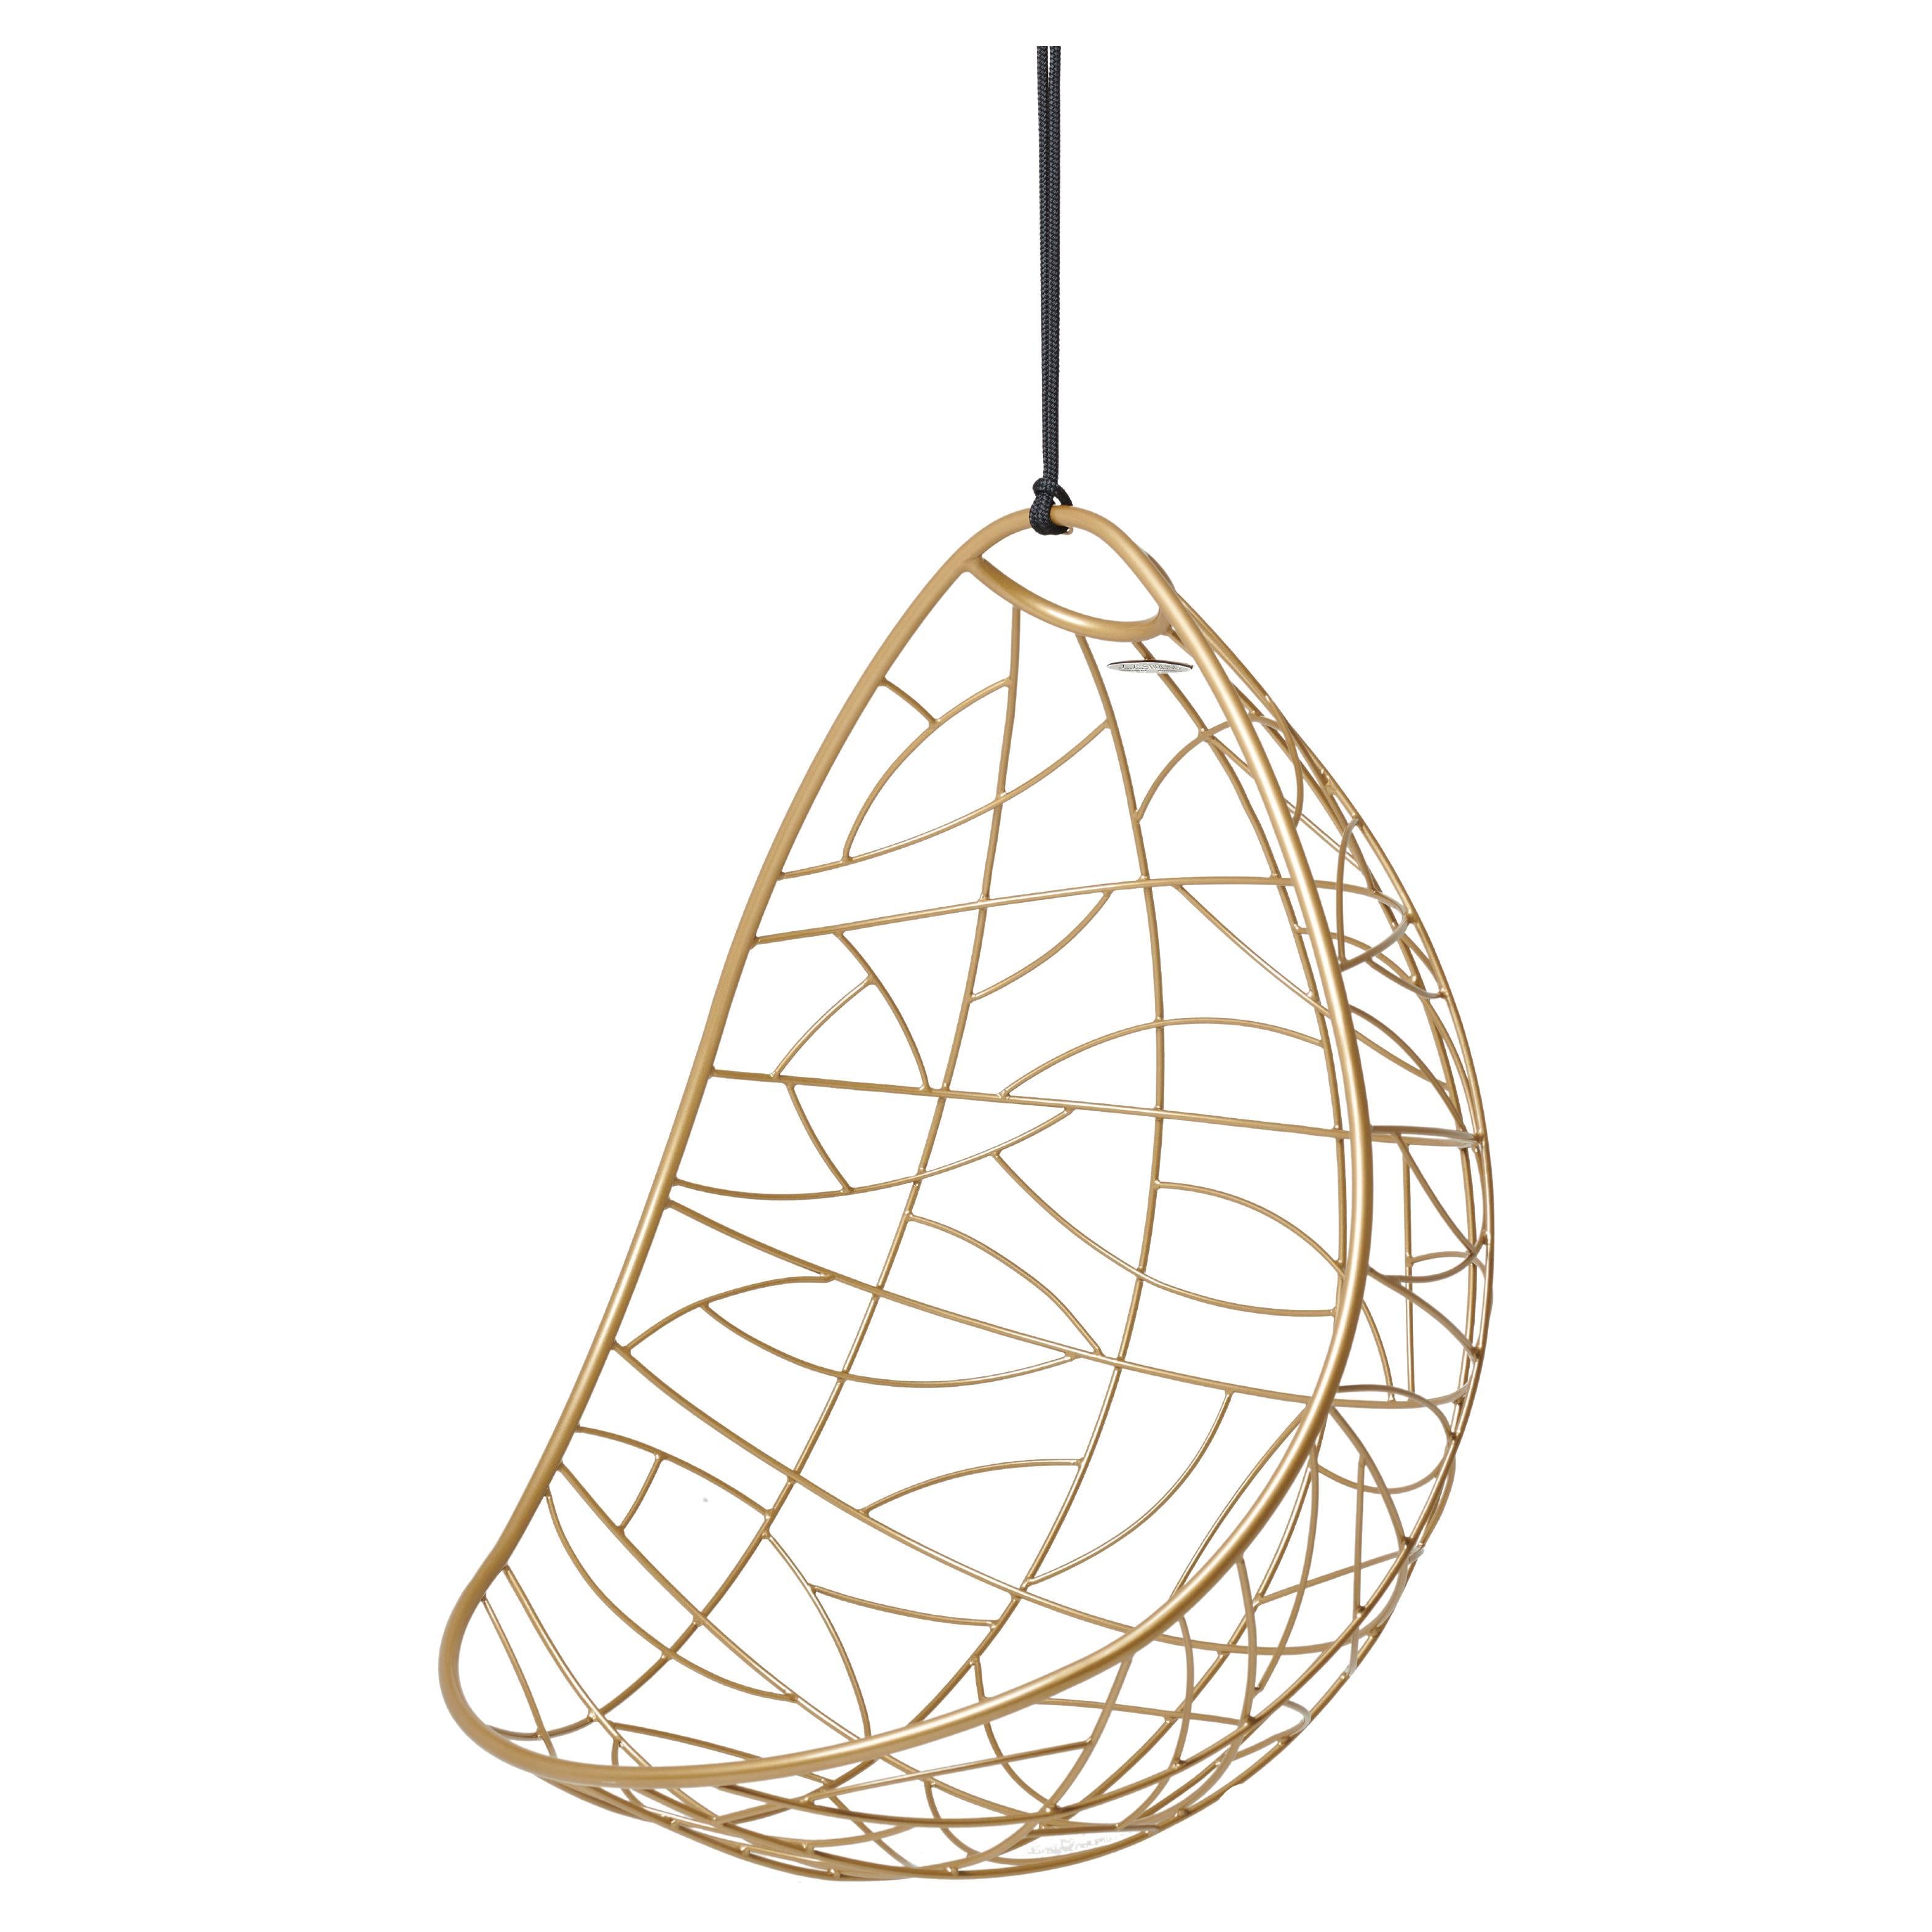 Golden, Minimal Hanging Chair For Sale